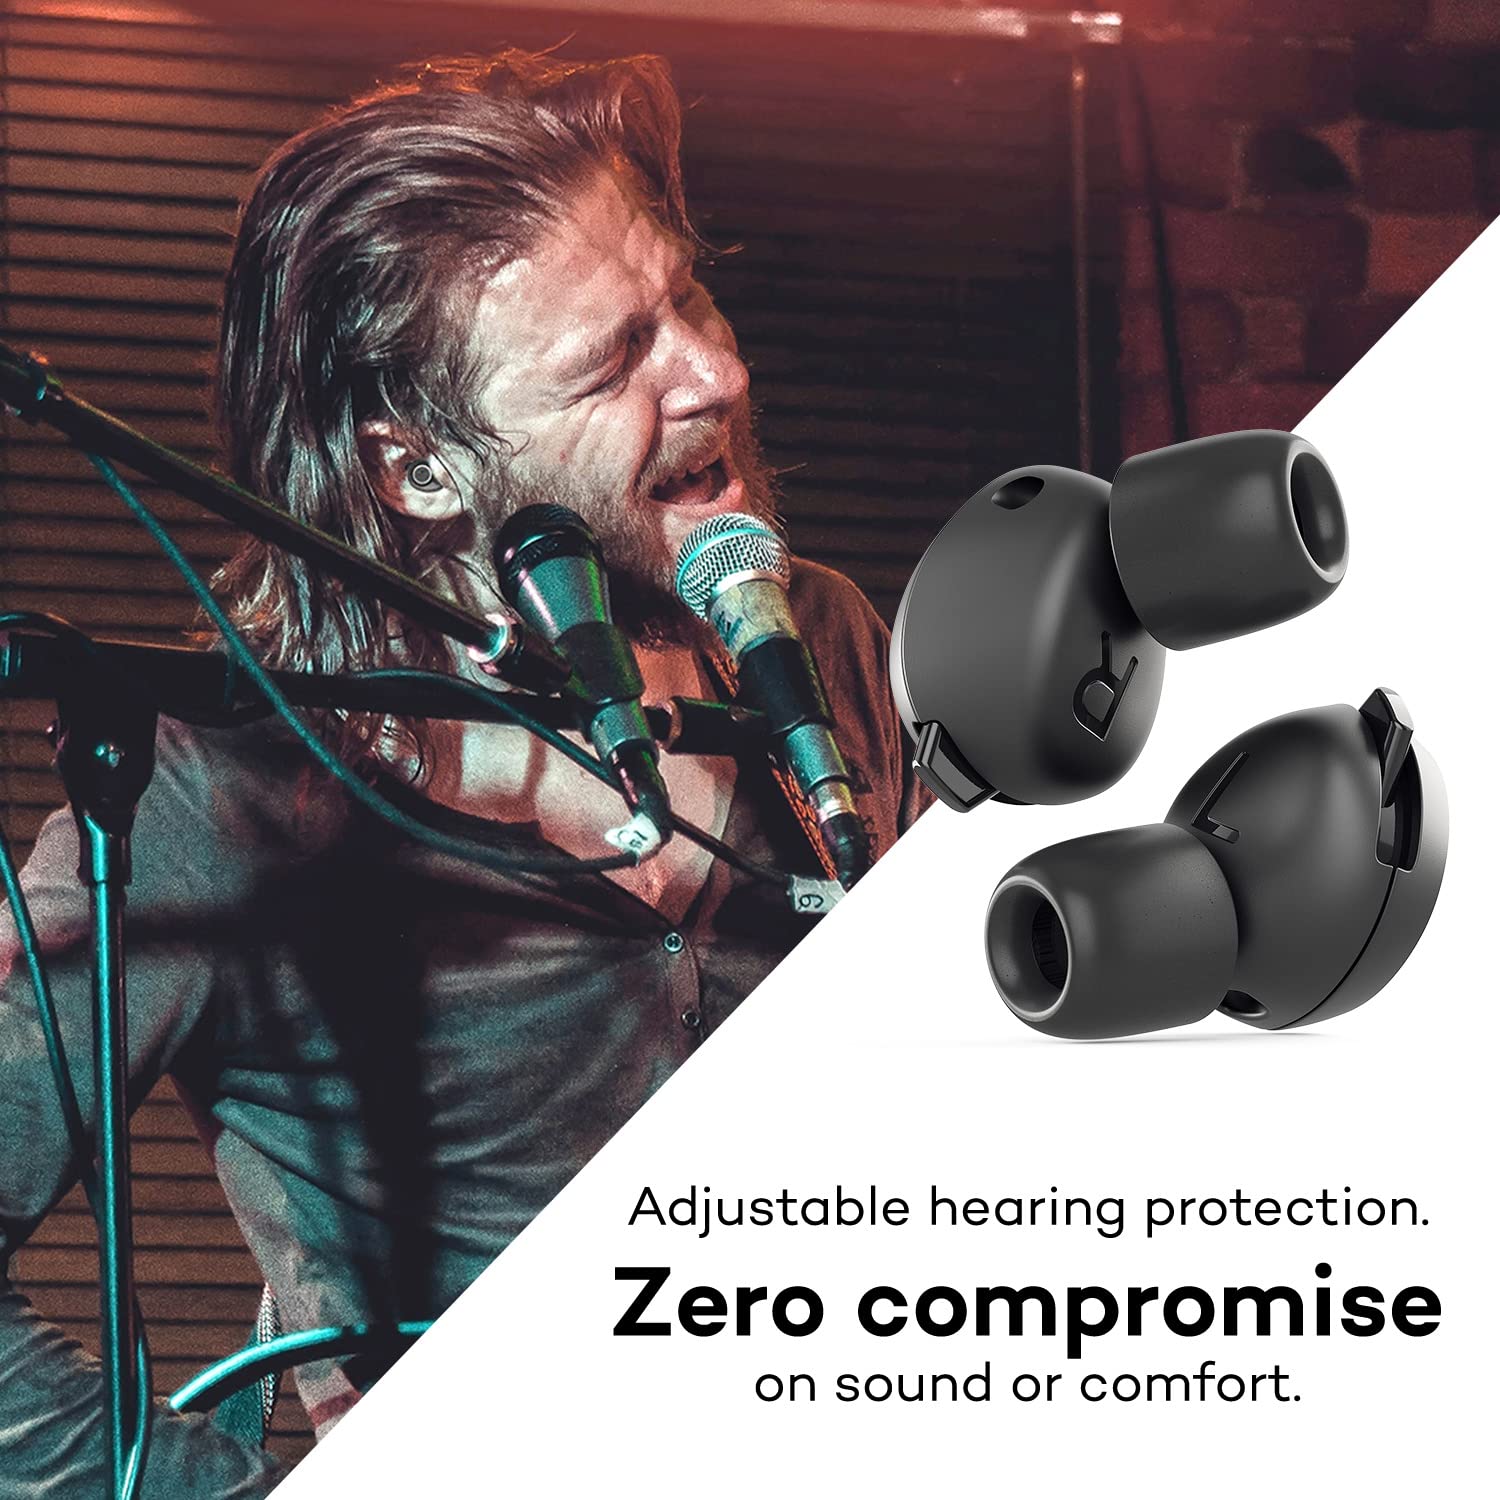 Minuendo high fidelity acoustic earplugs | Hearing protection for musicians | Adjustable dB attenuation ear plugs | Made in Norway | Award winning design | Suitable for concerts, gigs, working Black